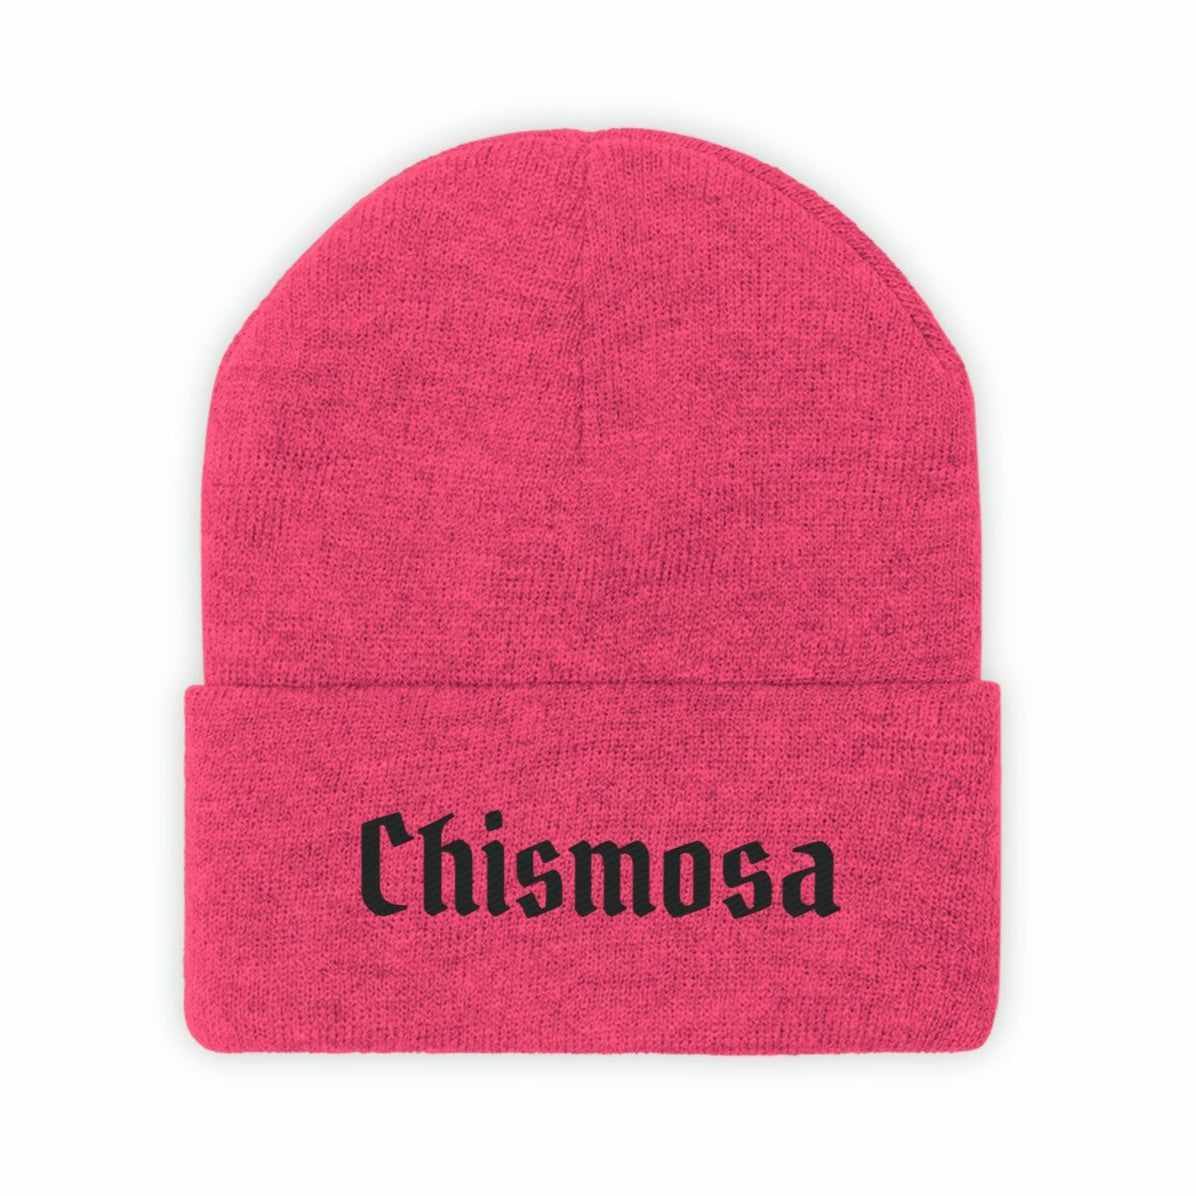 Neon pink knit beanie hat for Hispanic women and Spanish speakers. The world "Chismosa" is embroidered in black old English style lettering